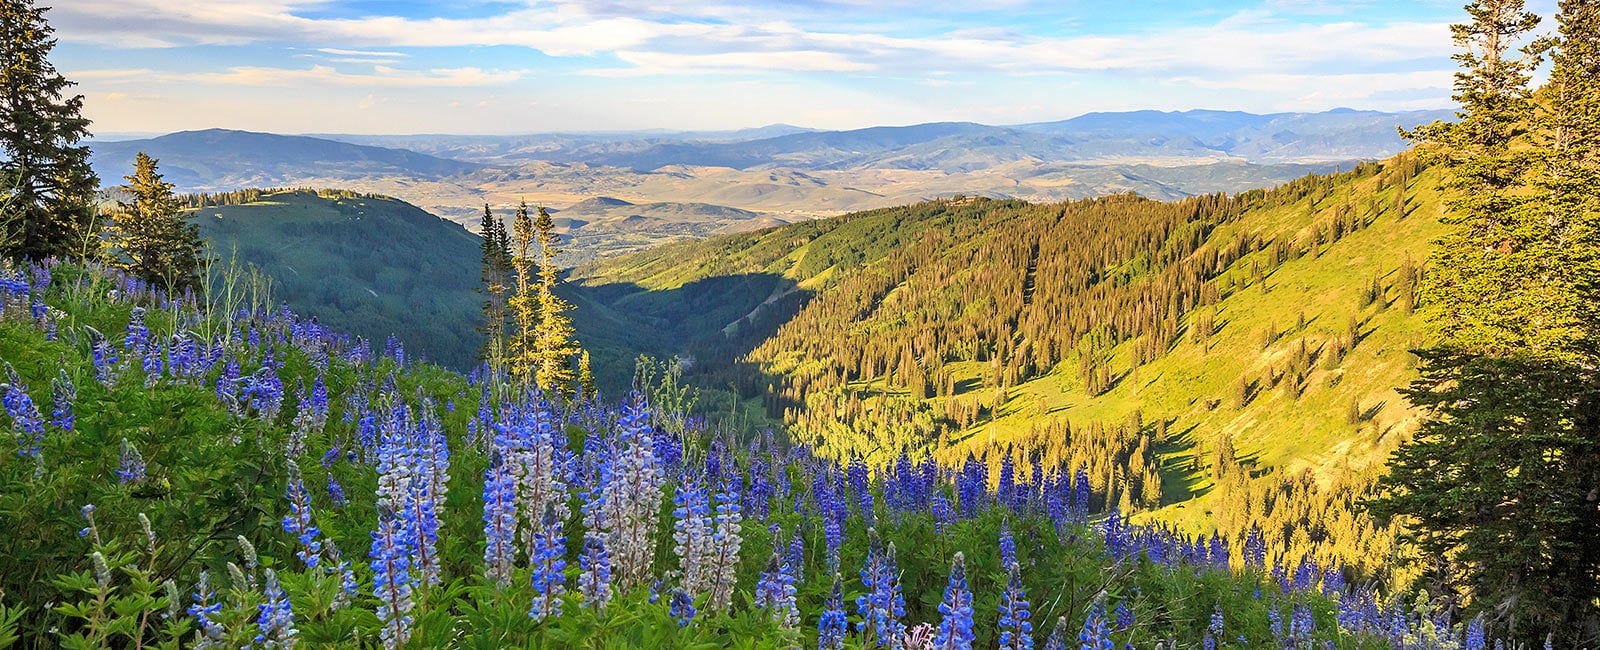 Enjoy A Vacation in Park City, Utah with Hilton Grand Vacations